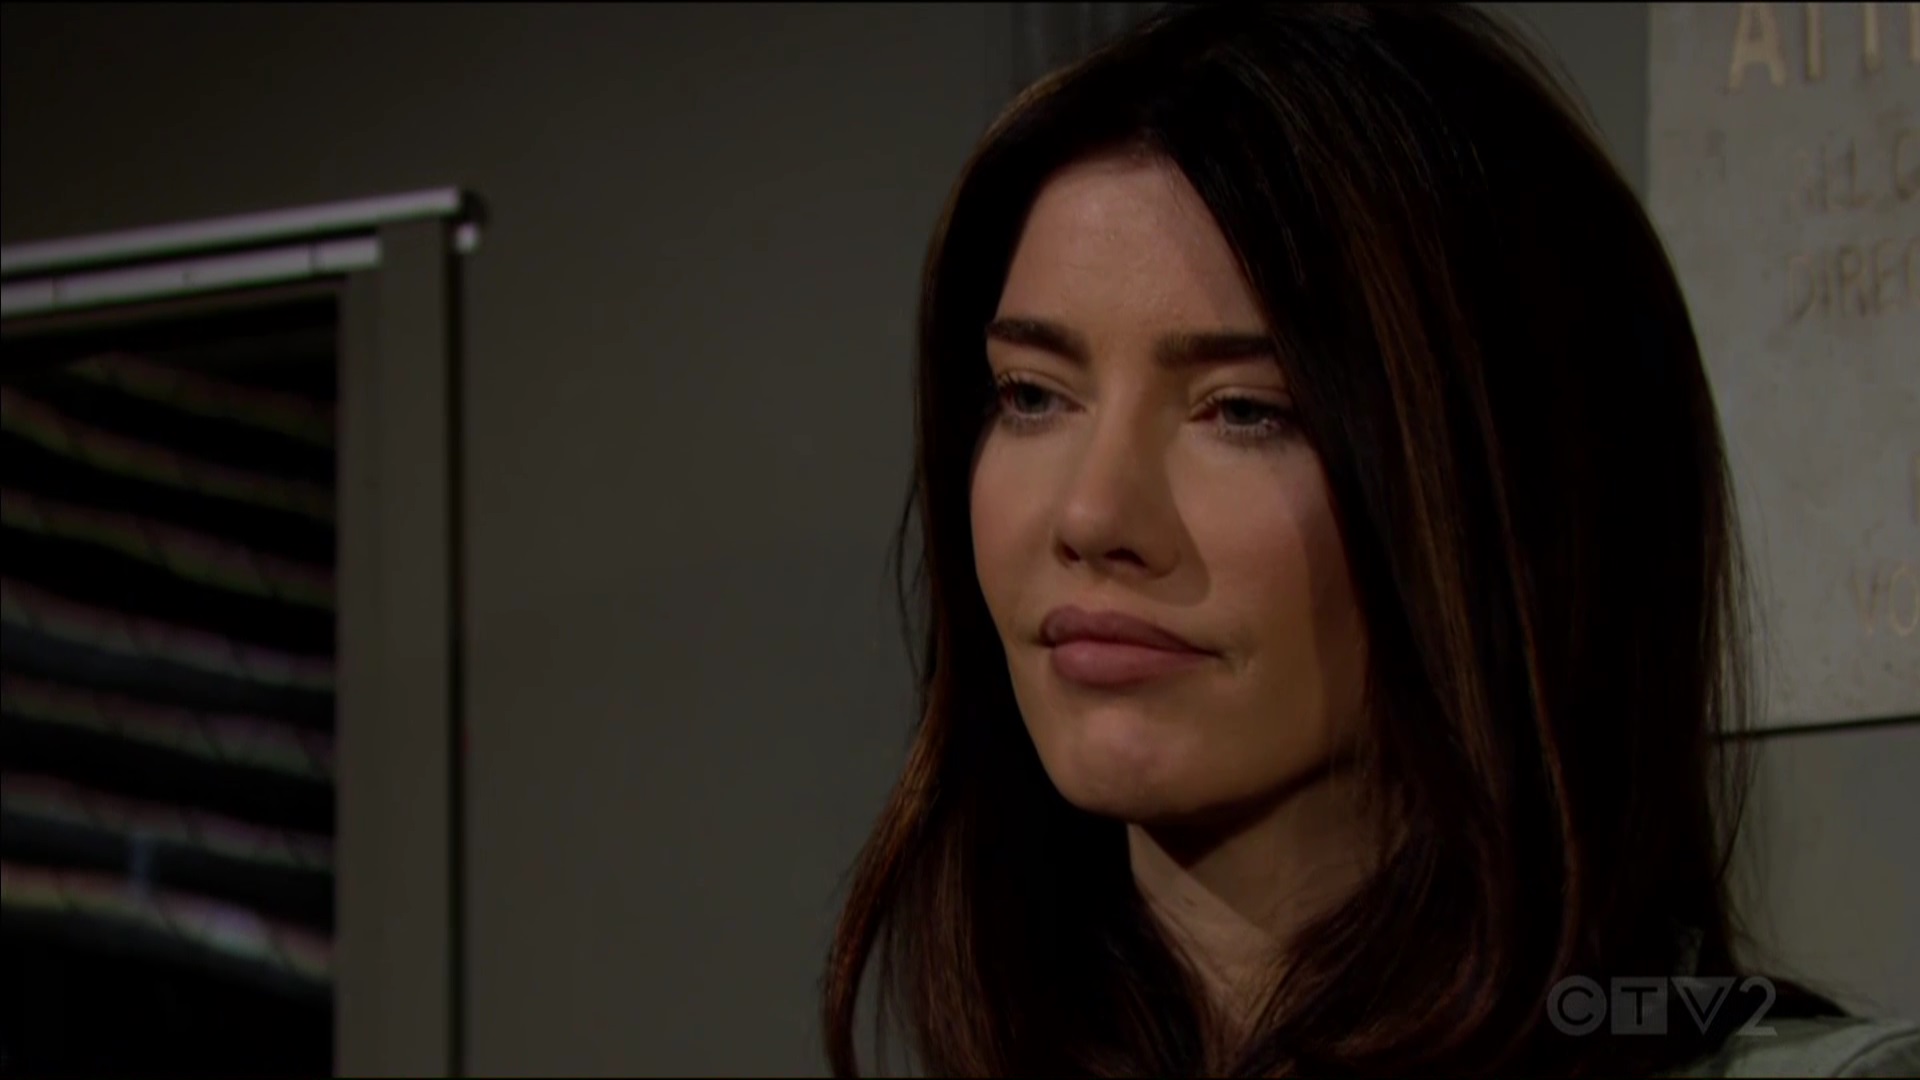 steffy snarks that prison suits sheila.